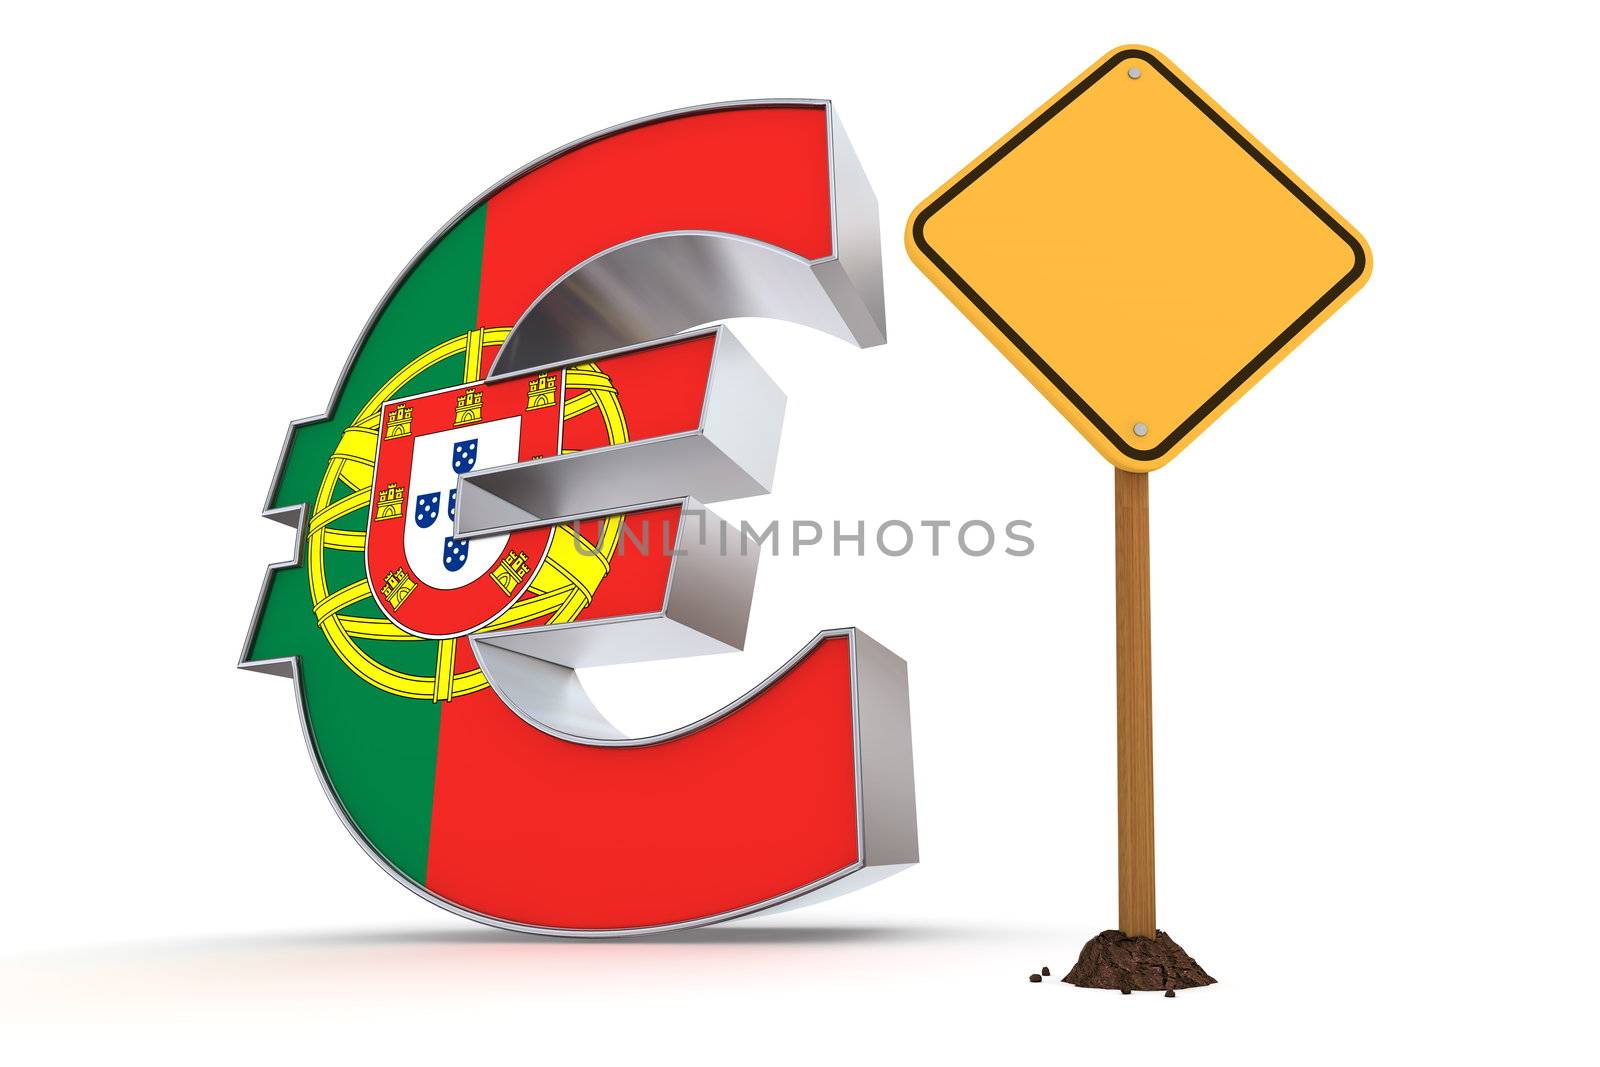 shiny metallic Euro symbol with a portuguese flag on it's front - a yellow quadrangular warning sign stands next to it